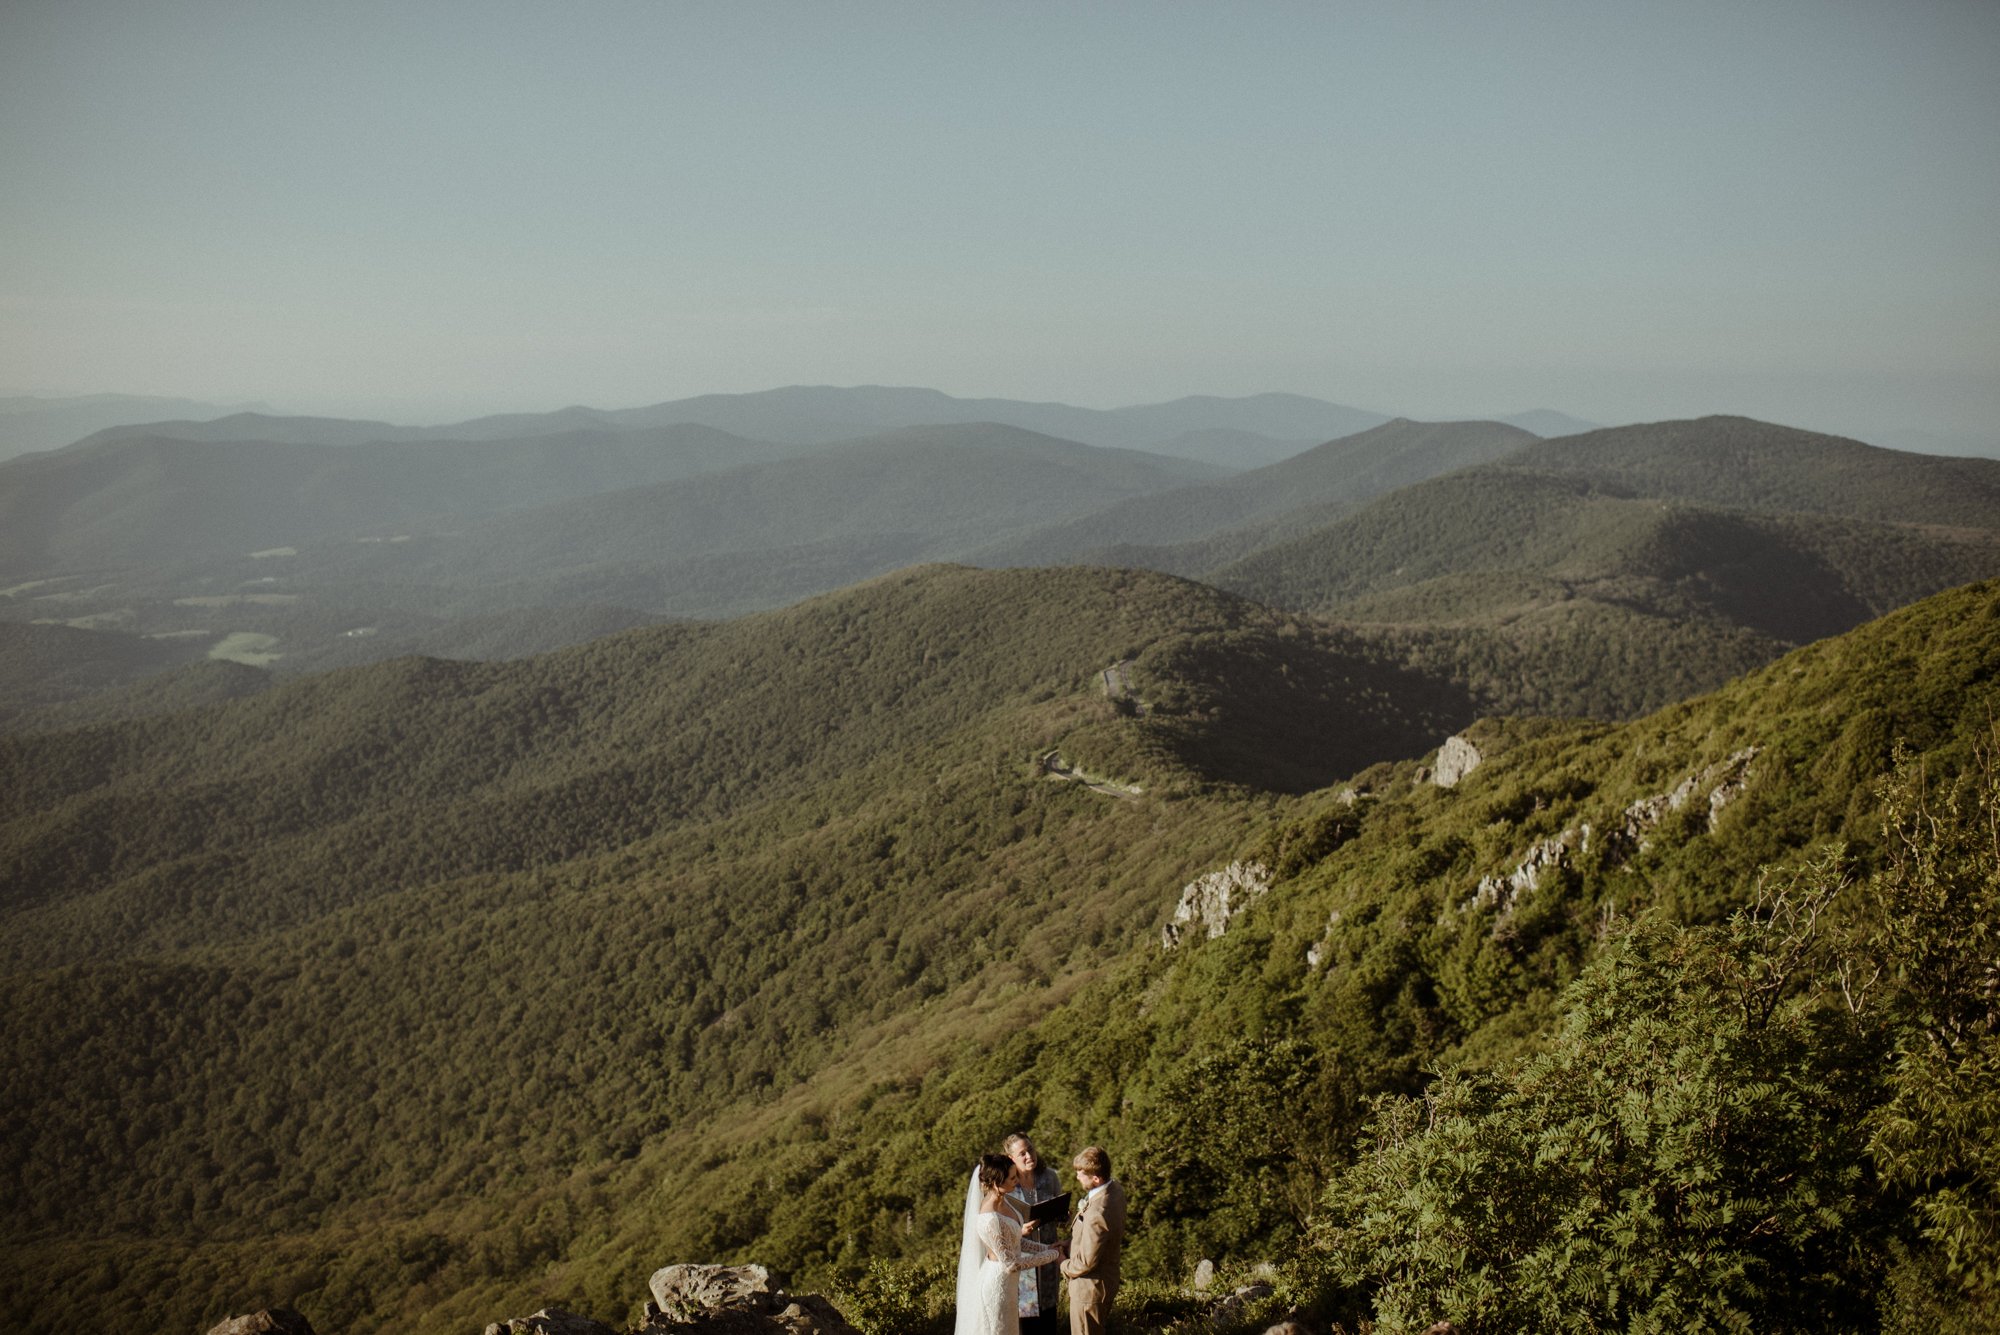 Sunset Elopement on Stony Man Summit in Shenandoah National Park - White Sails Creative Elopement Photography - July Elopement on the Blue Ridge Parkway_27.jpg